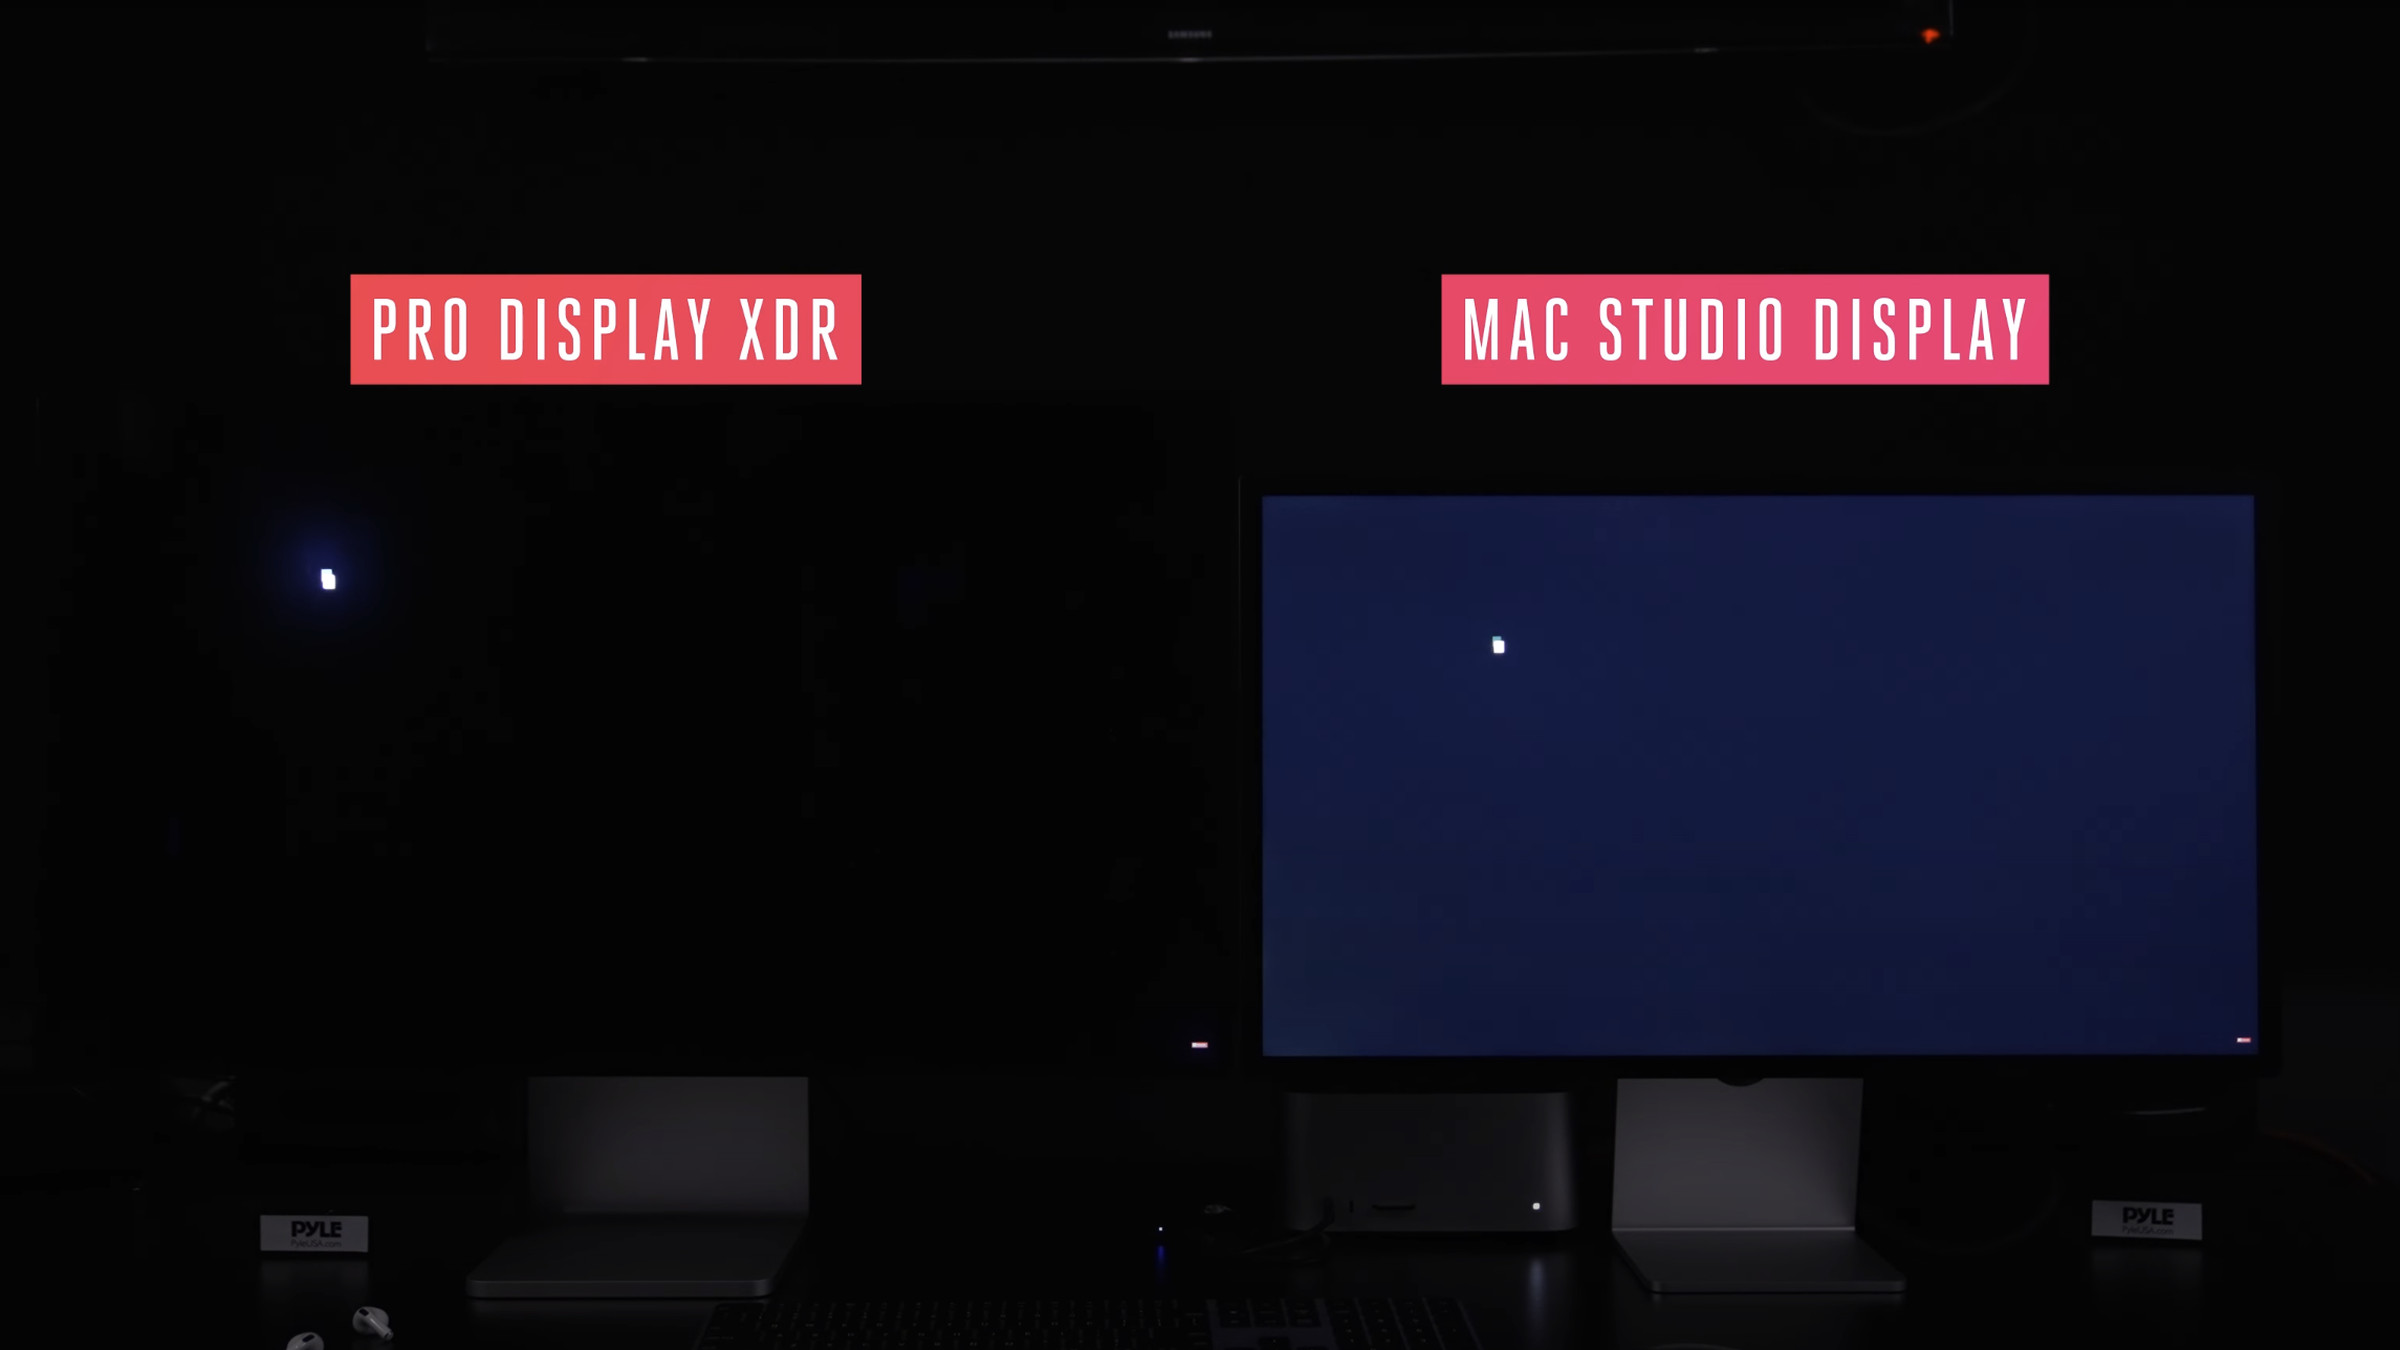 The Studio Display’s lack of local dimming is very apparent in this comparison next to the Pro Display XDR.